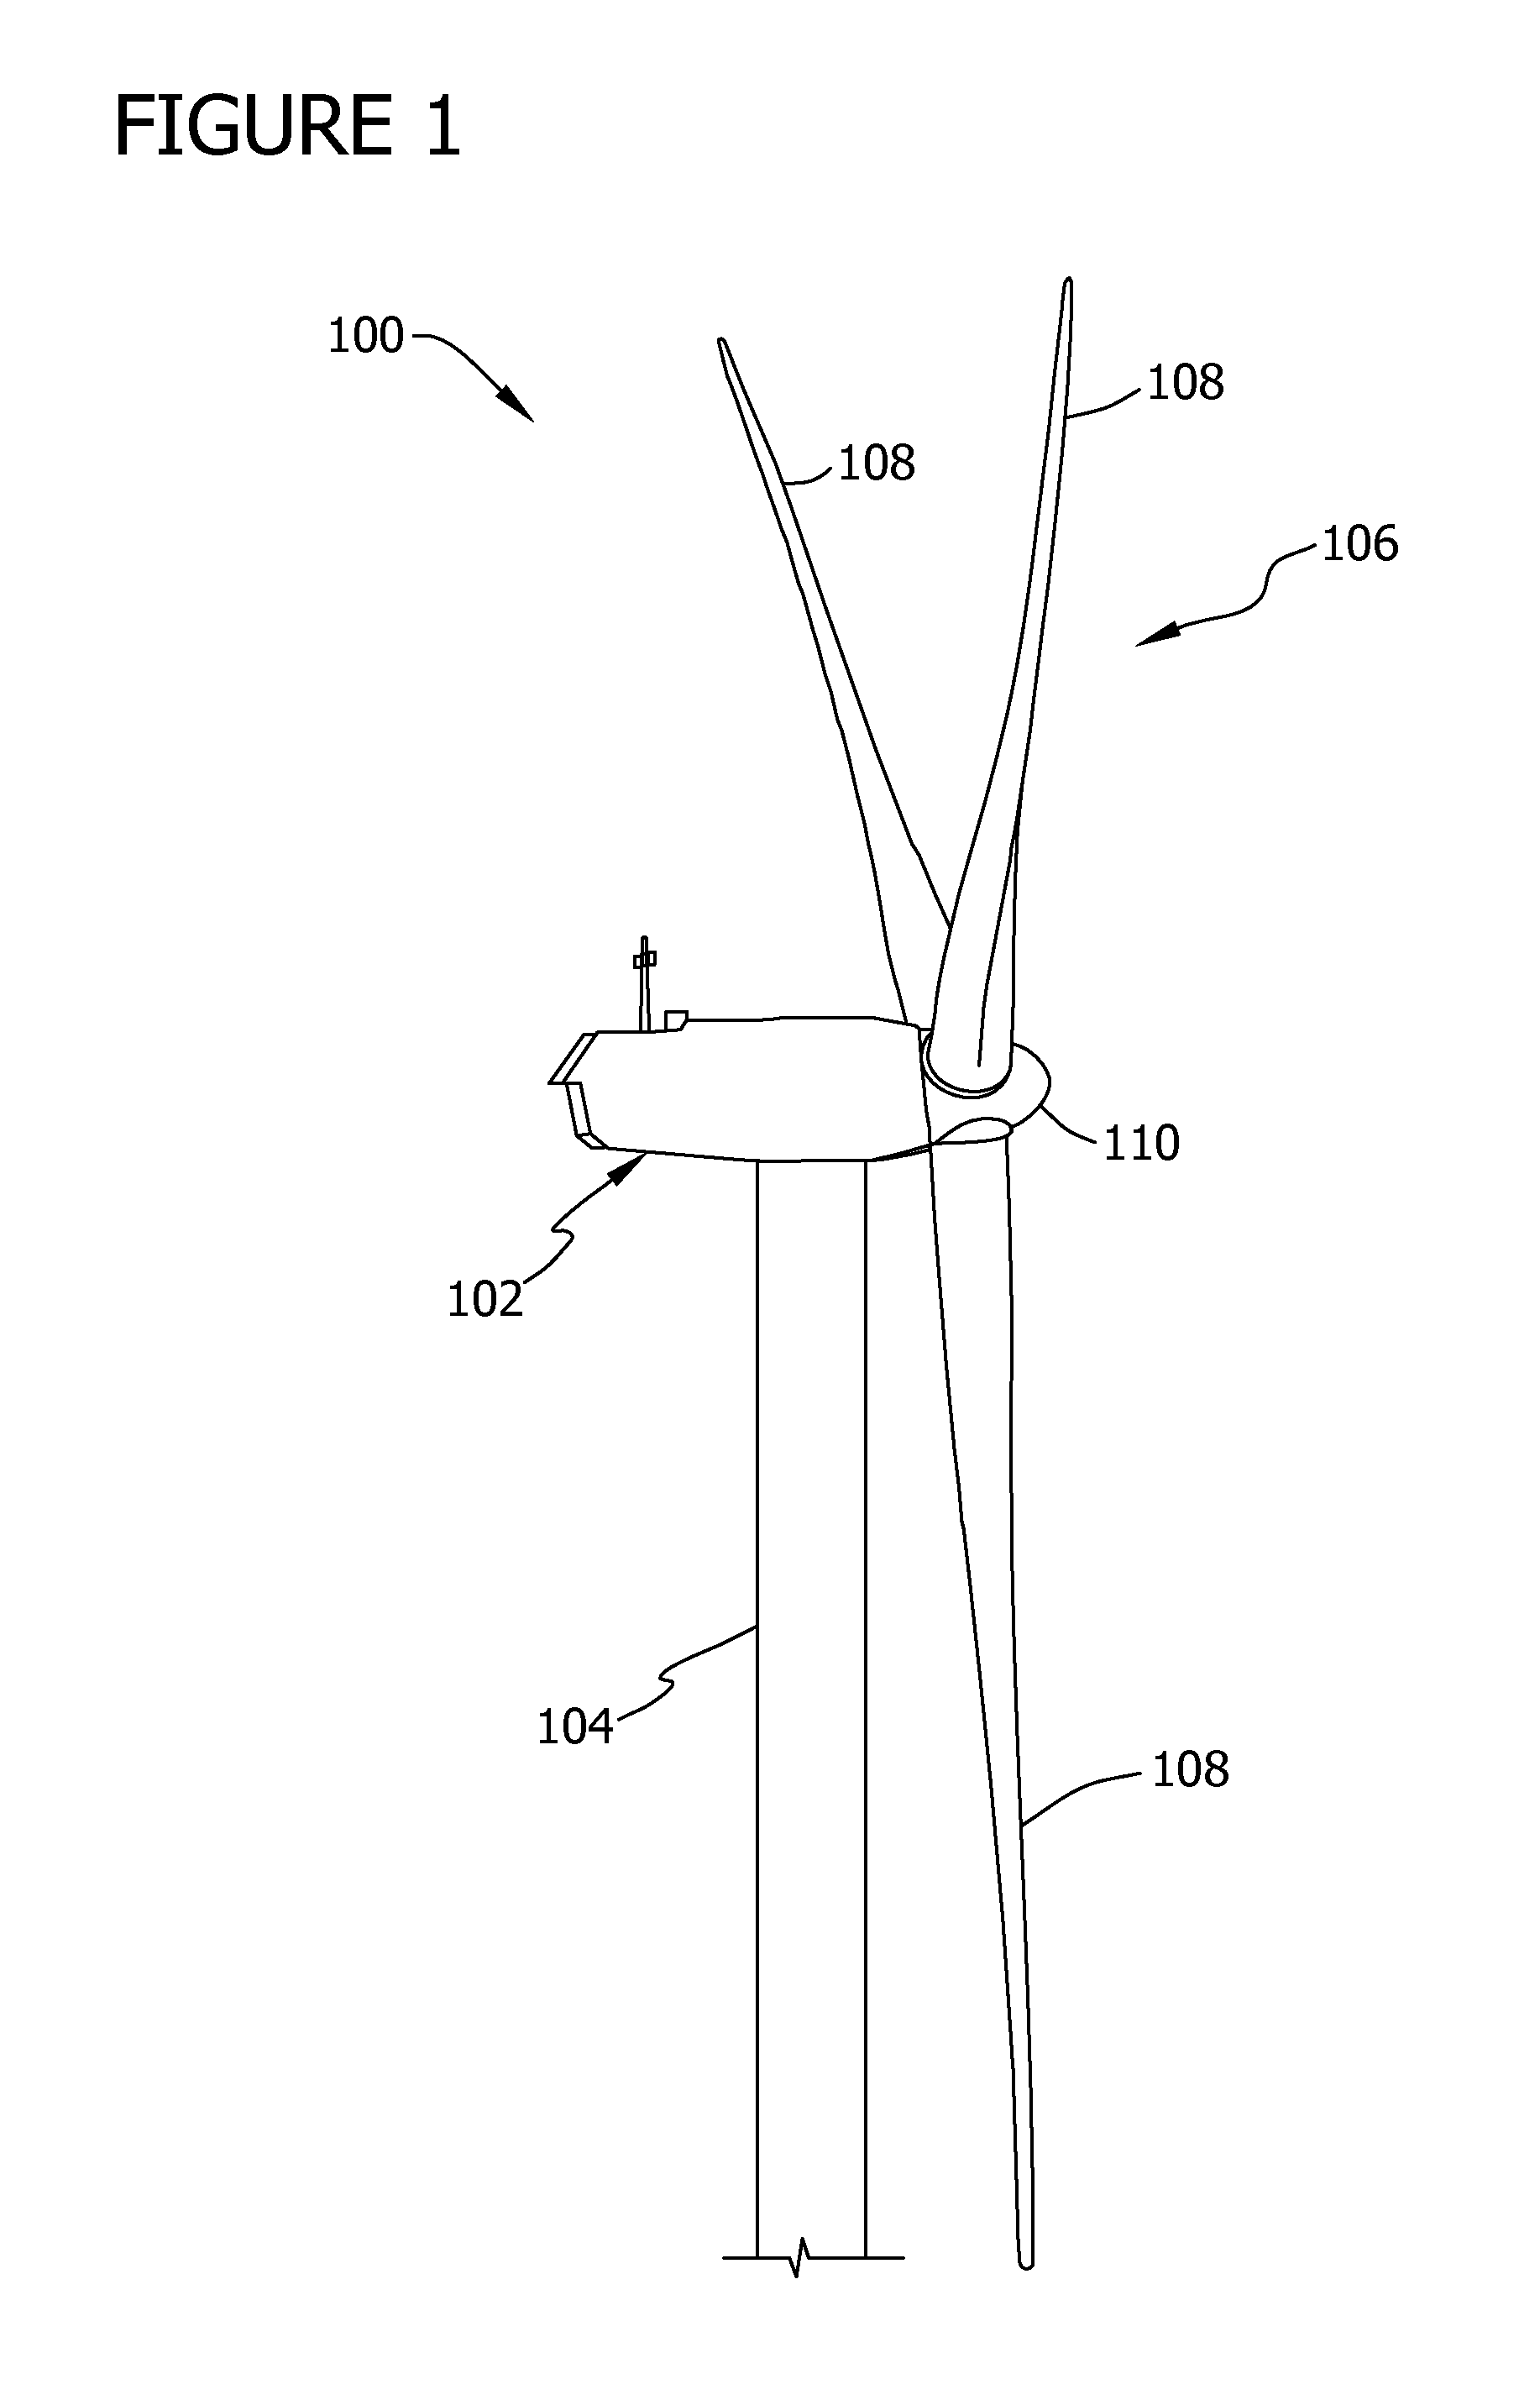 Method and apparatus for generating power in a wind turbine